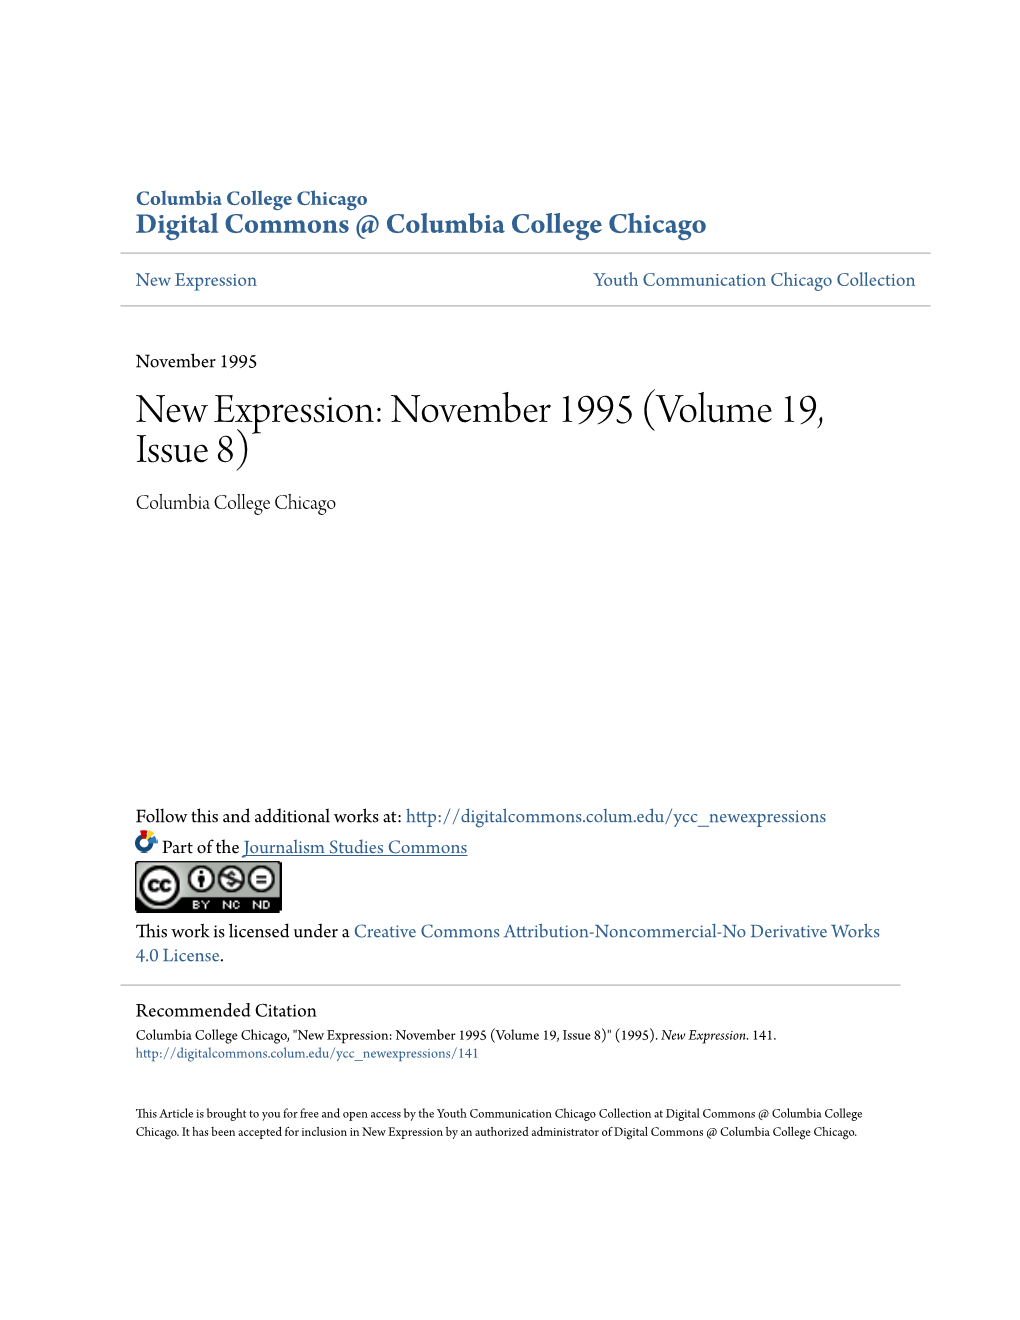 November 1995 New Expression: November 1995 (Volume 19, Issue 8) Columbia College Chicago